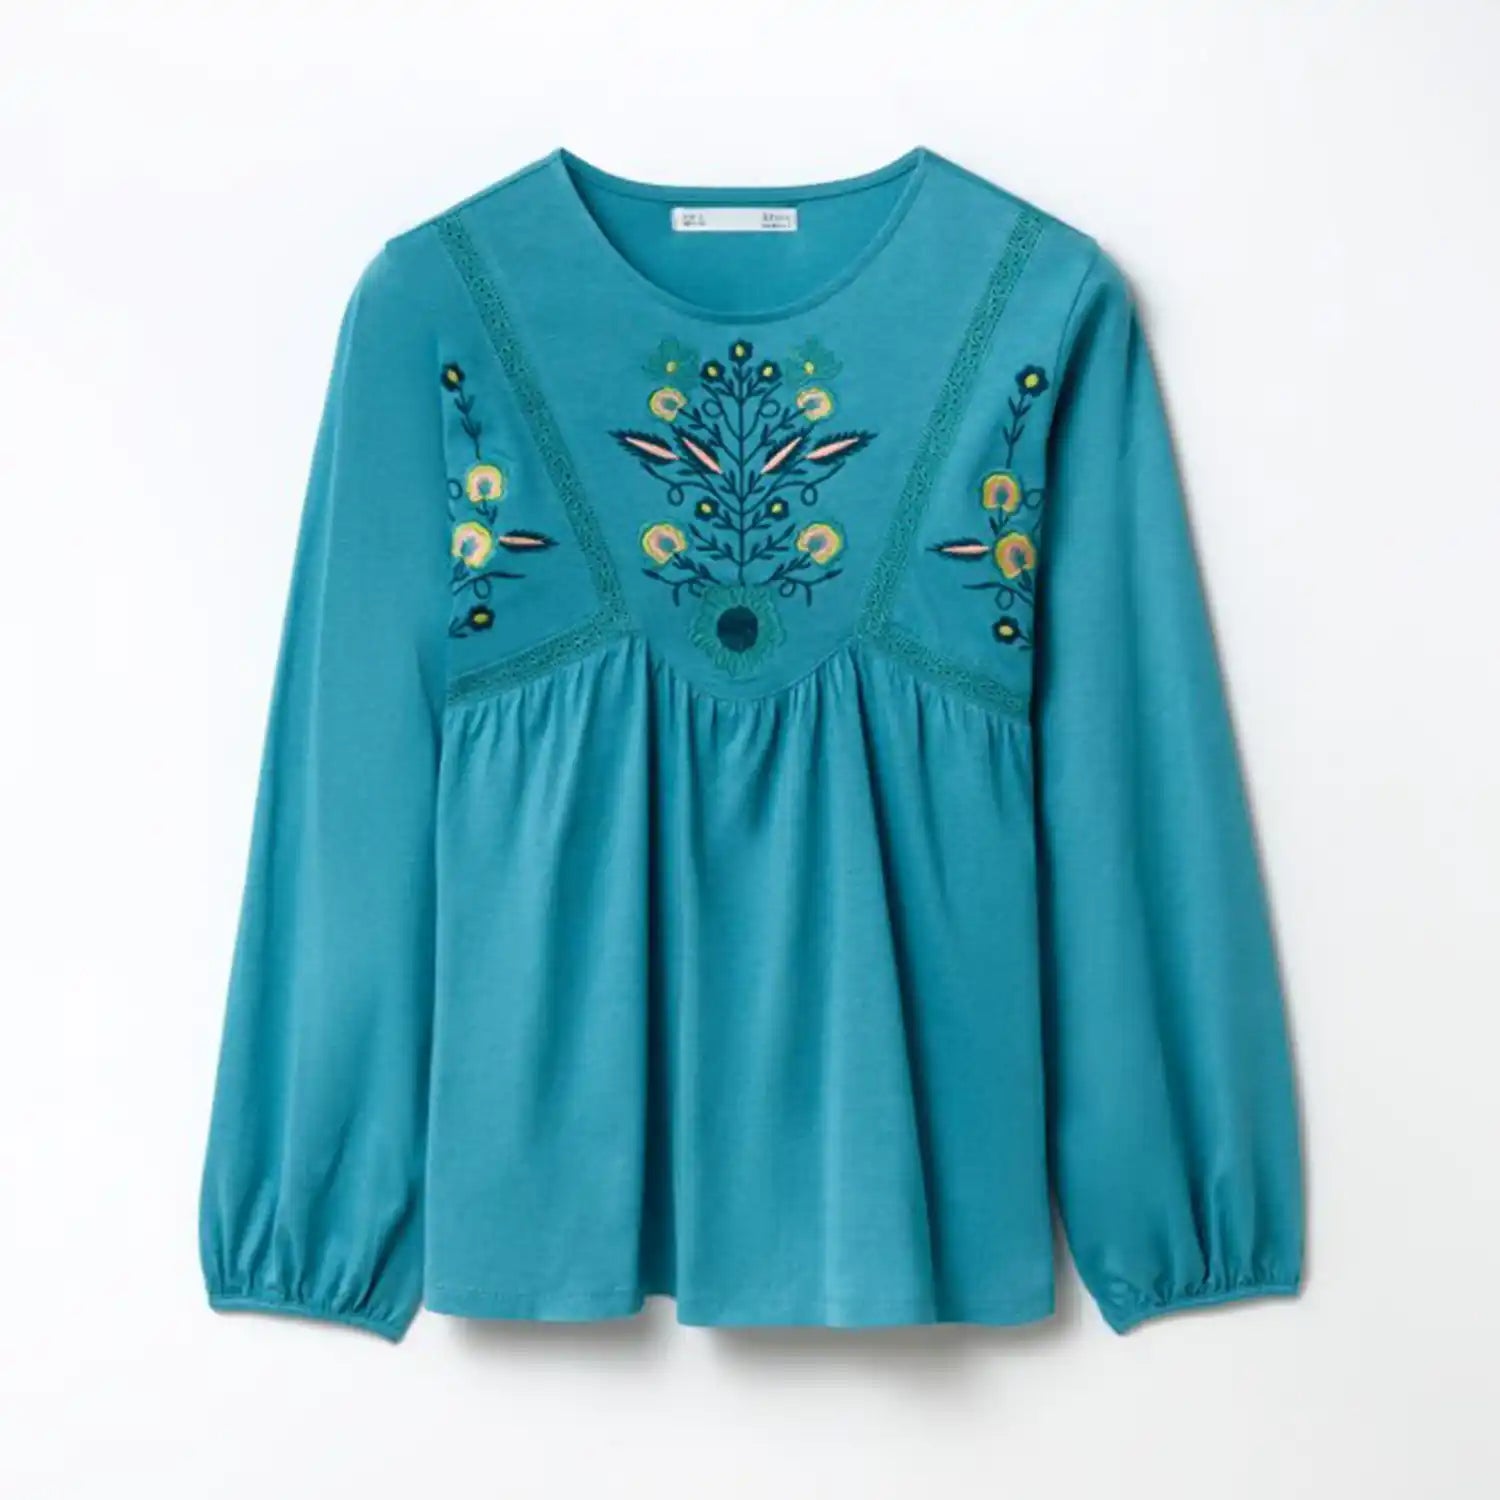 Sfera Embroidered top 1 Shaws Department Stores